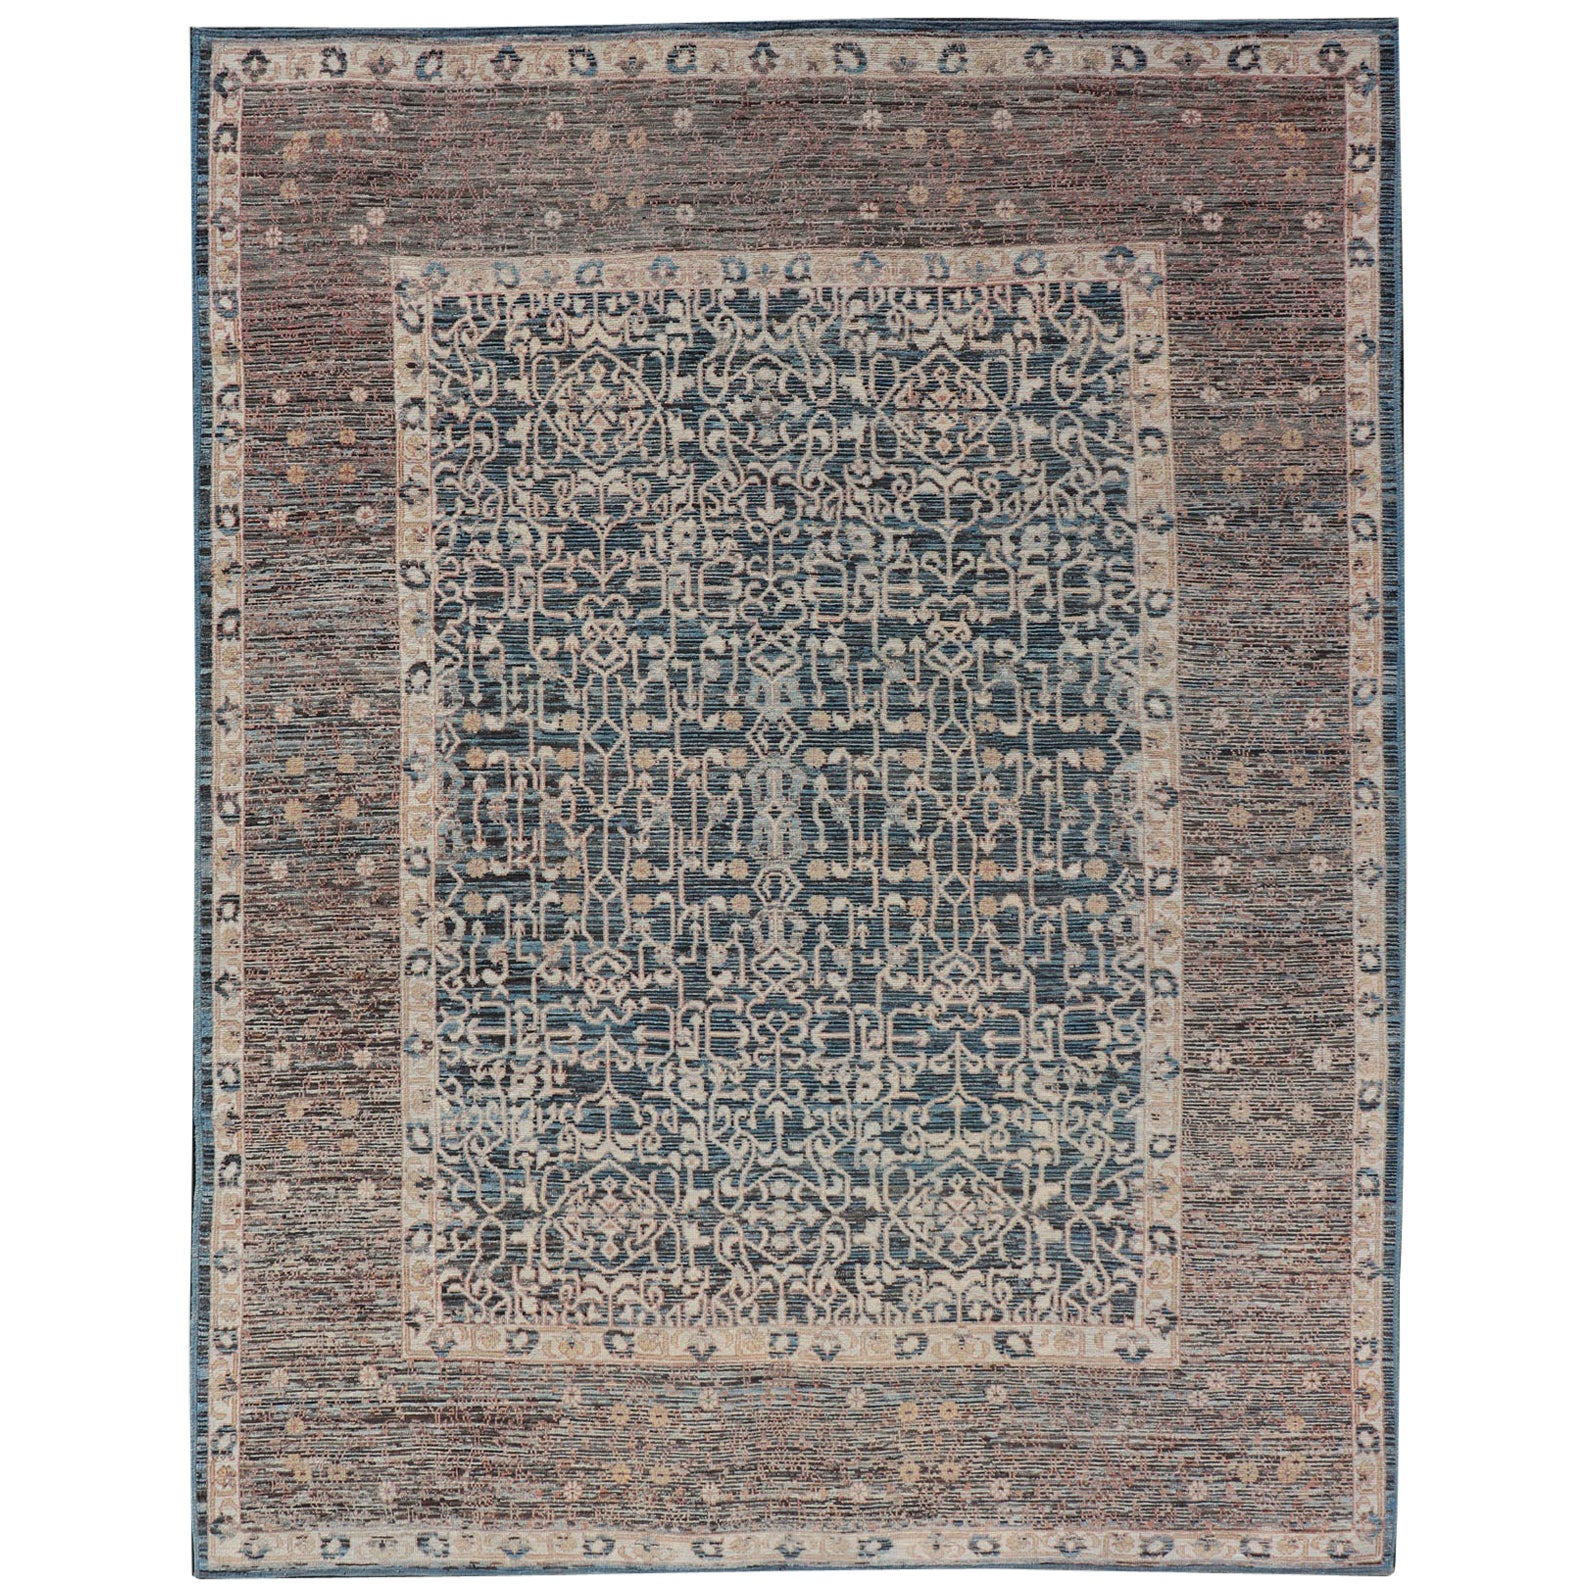 Contemporary Rug with Intricate Pattern Inspired by 13th Century Seljuk Designs For Sale